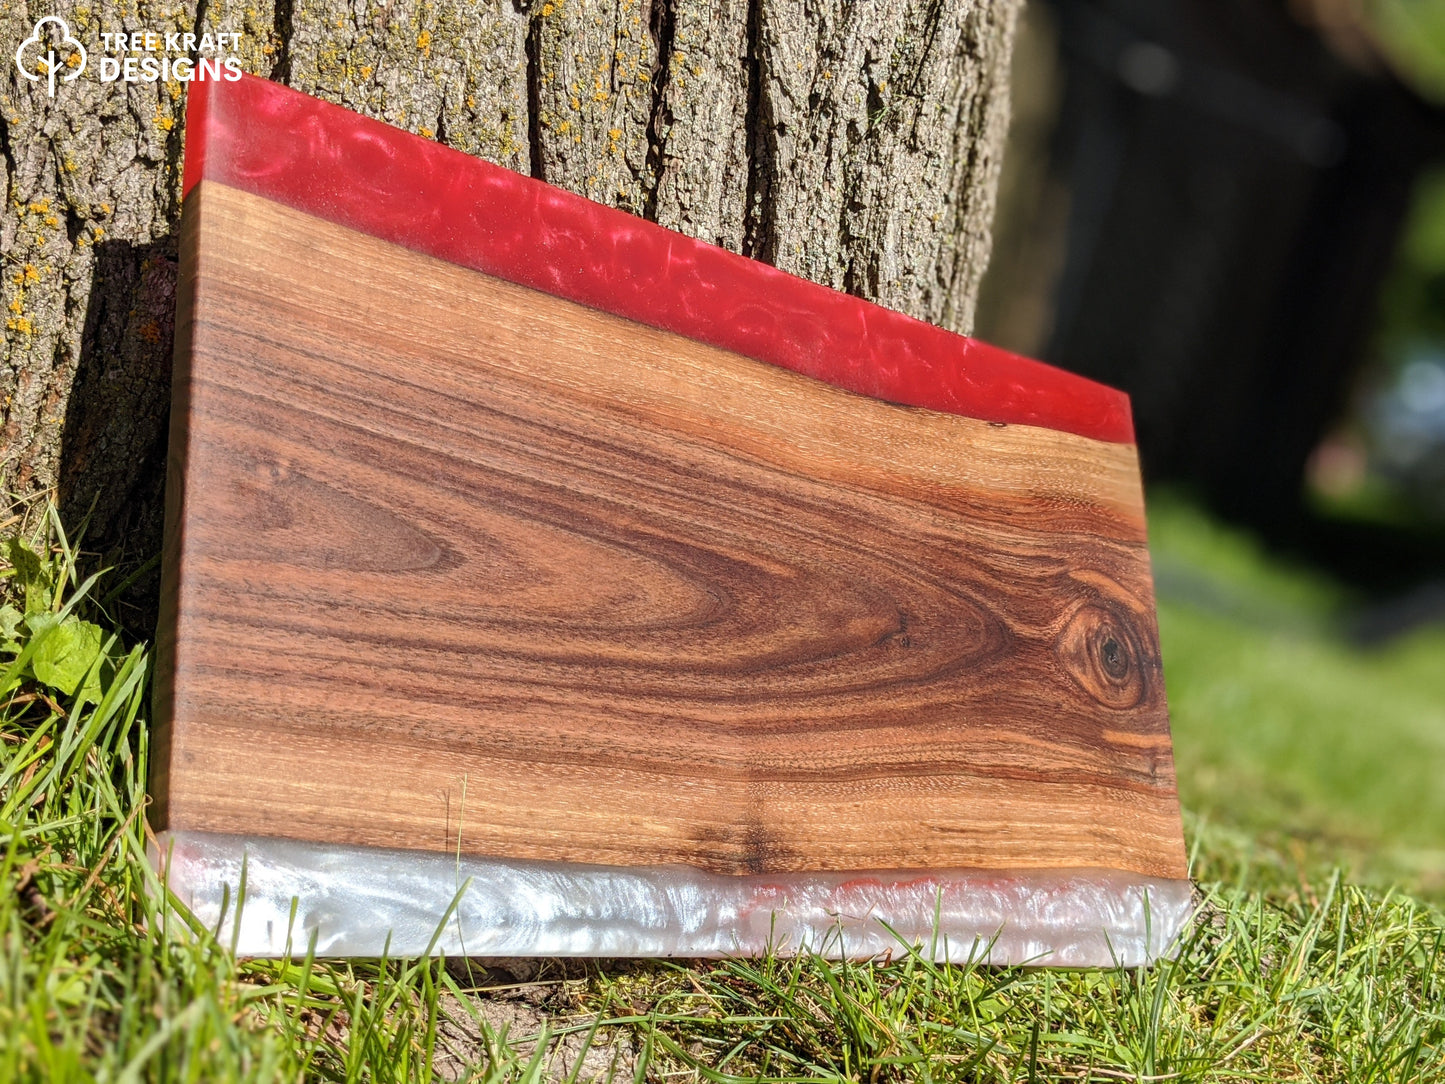 Dark Walnut with Red & White Epoxy with a Rustic Red Maple Leaf Epoxy Inlay